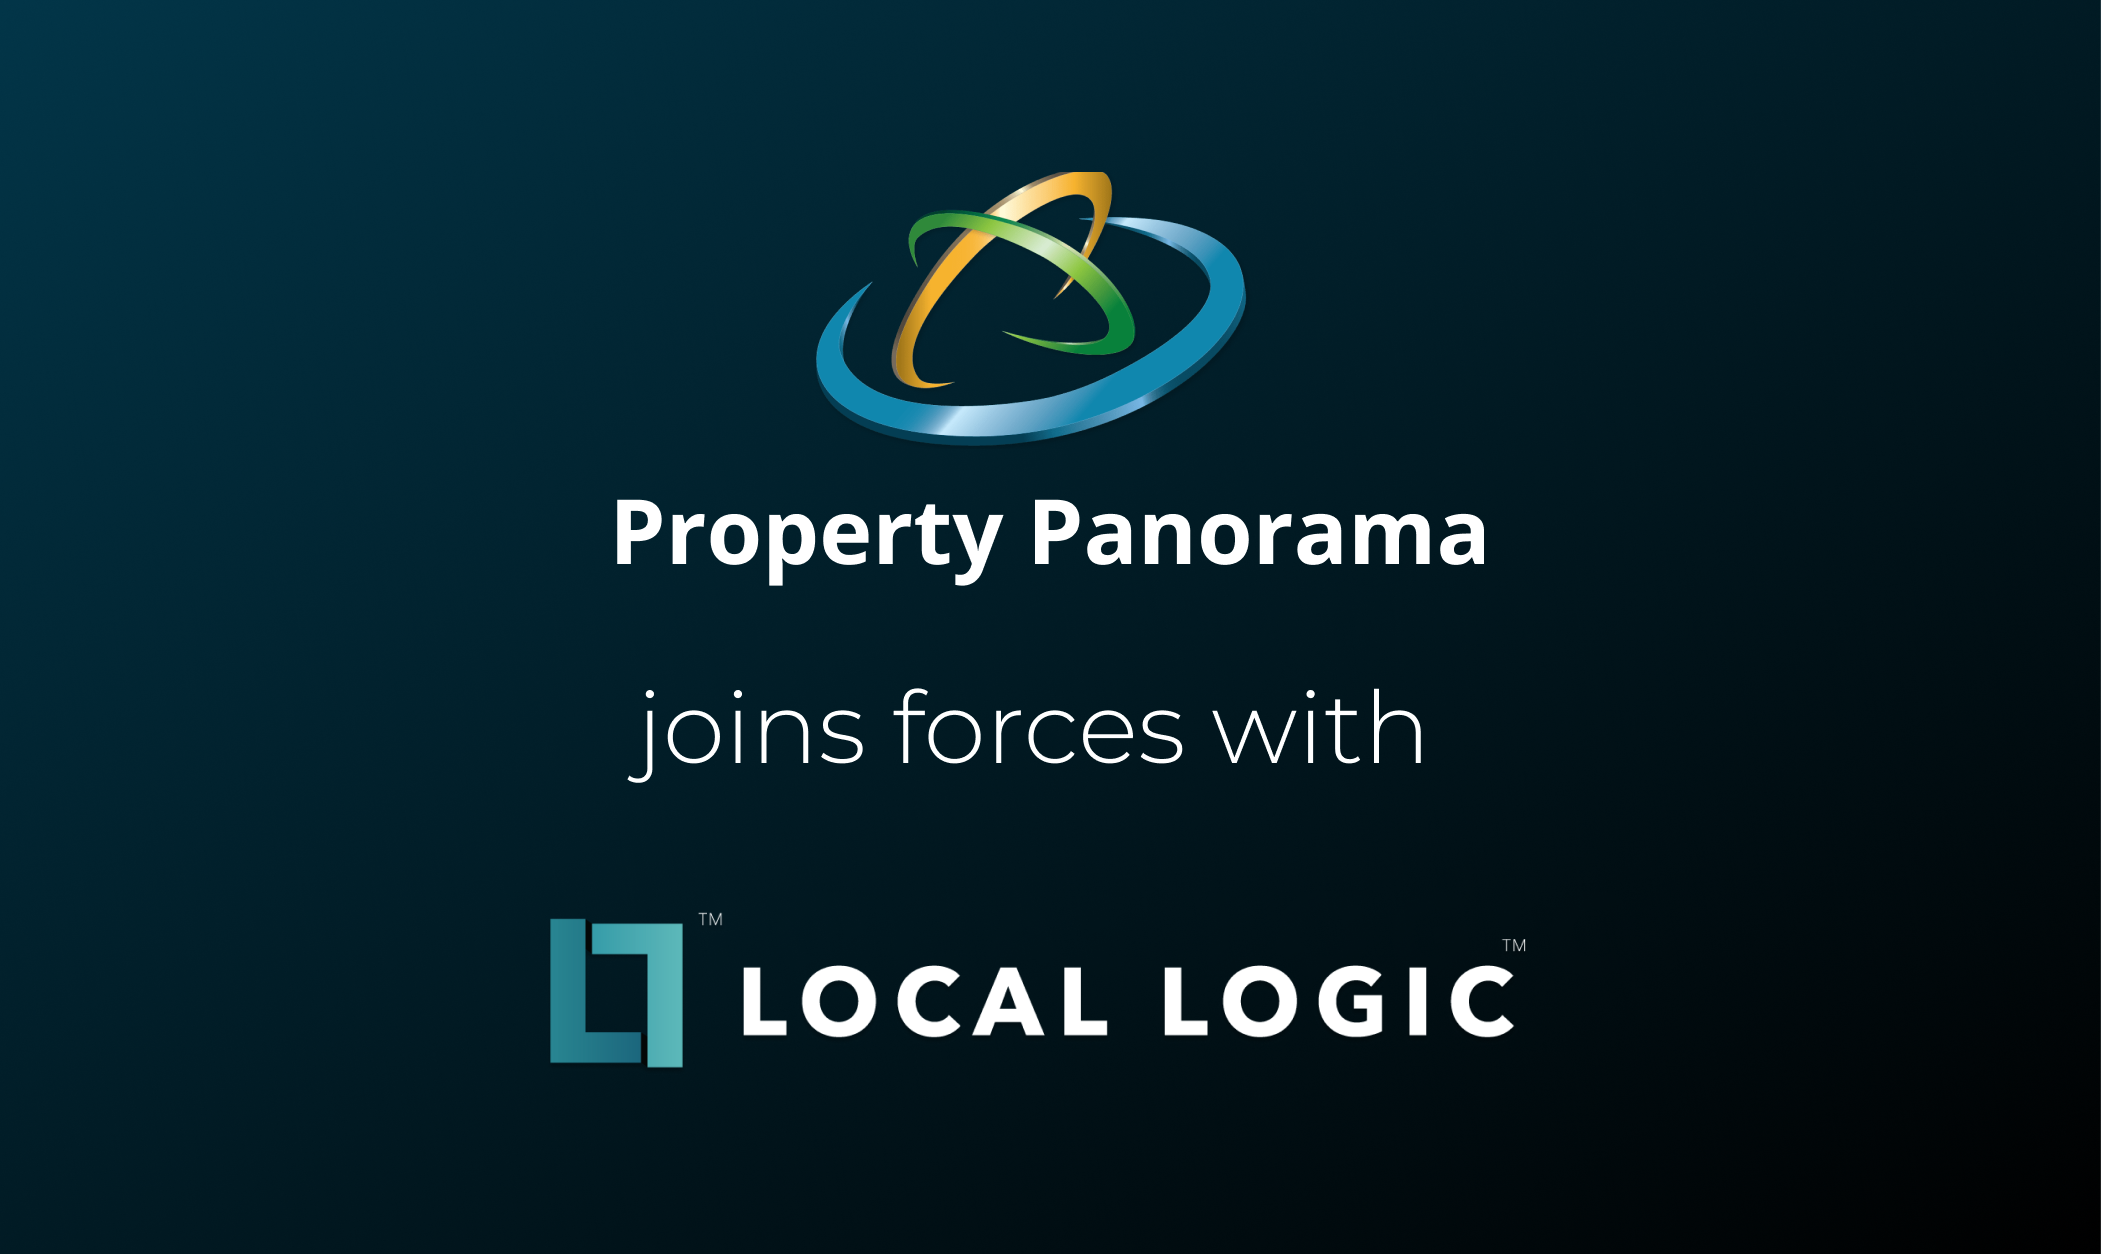 property panorama logo with local logic logo to announce partnership over a navy background